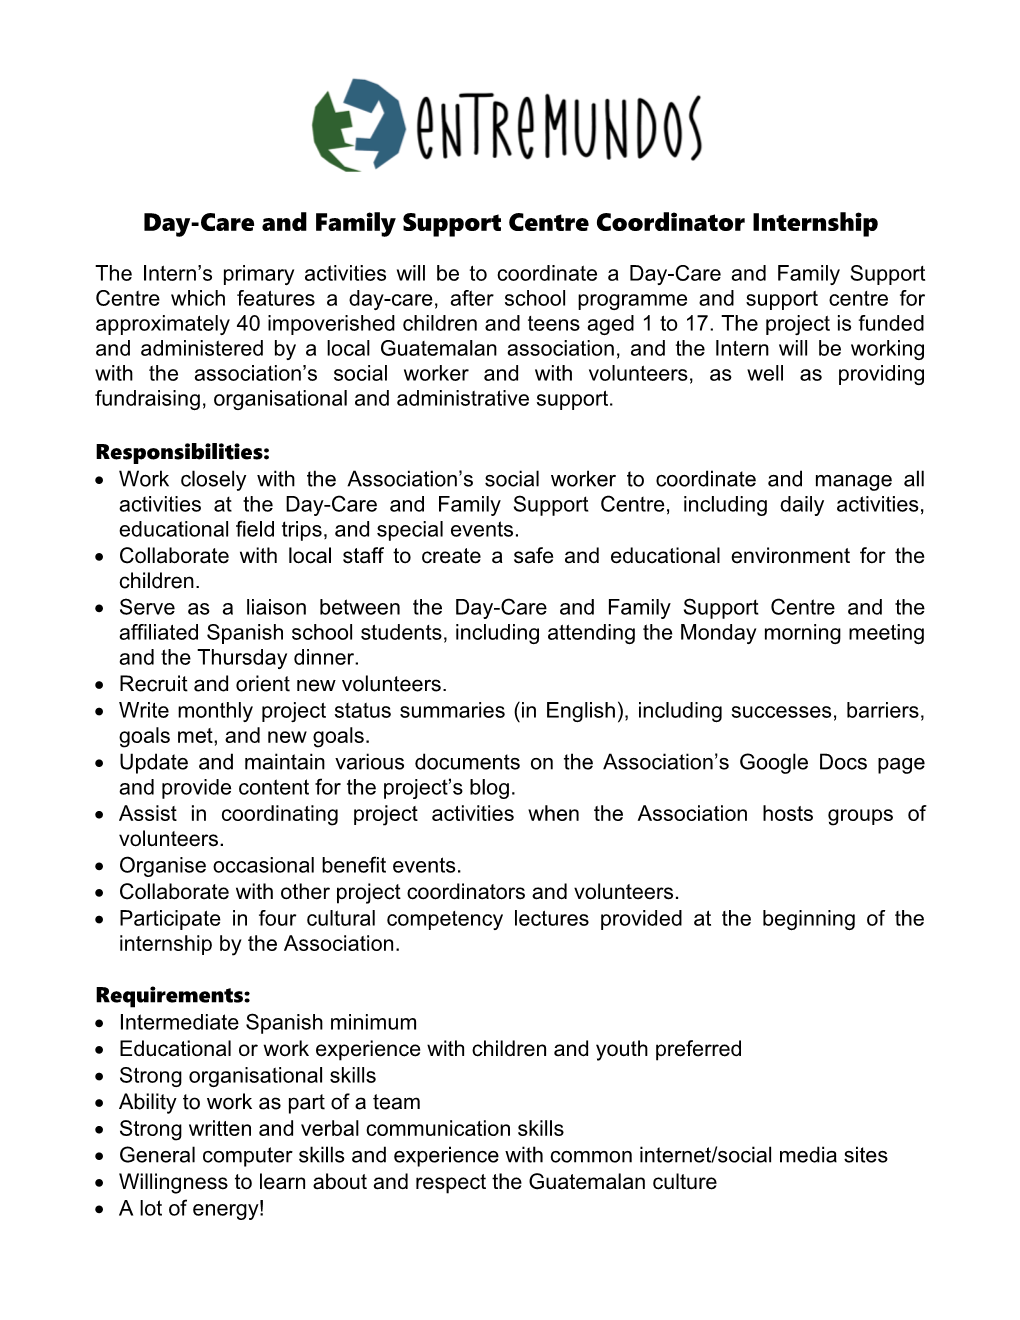 Day-Care and Family Support Centre Coordinator Internship